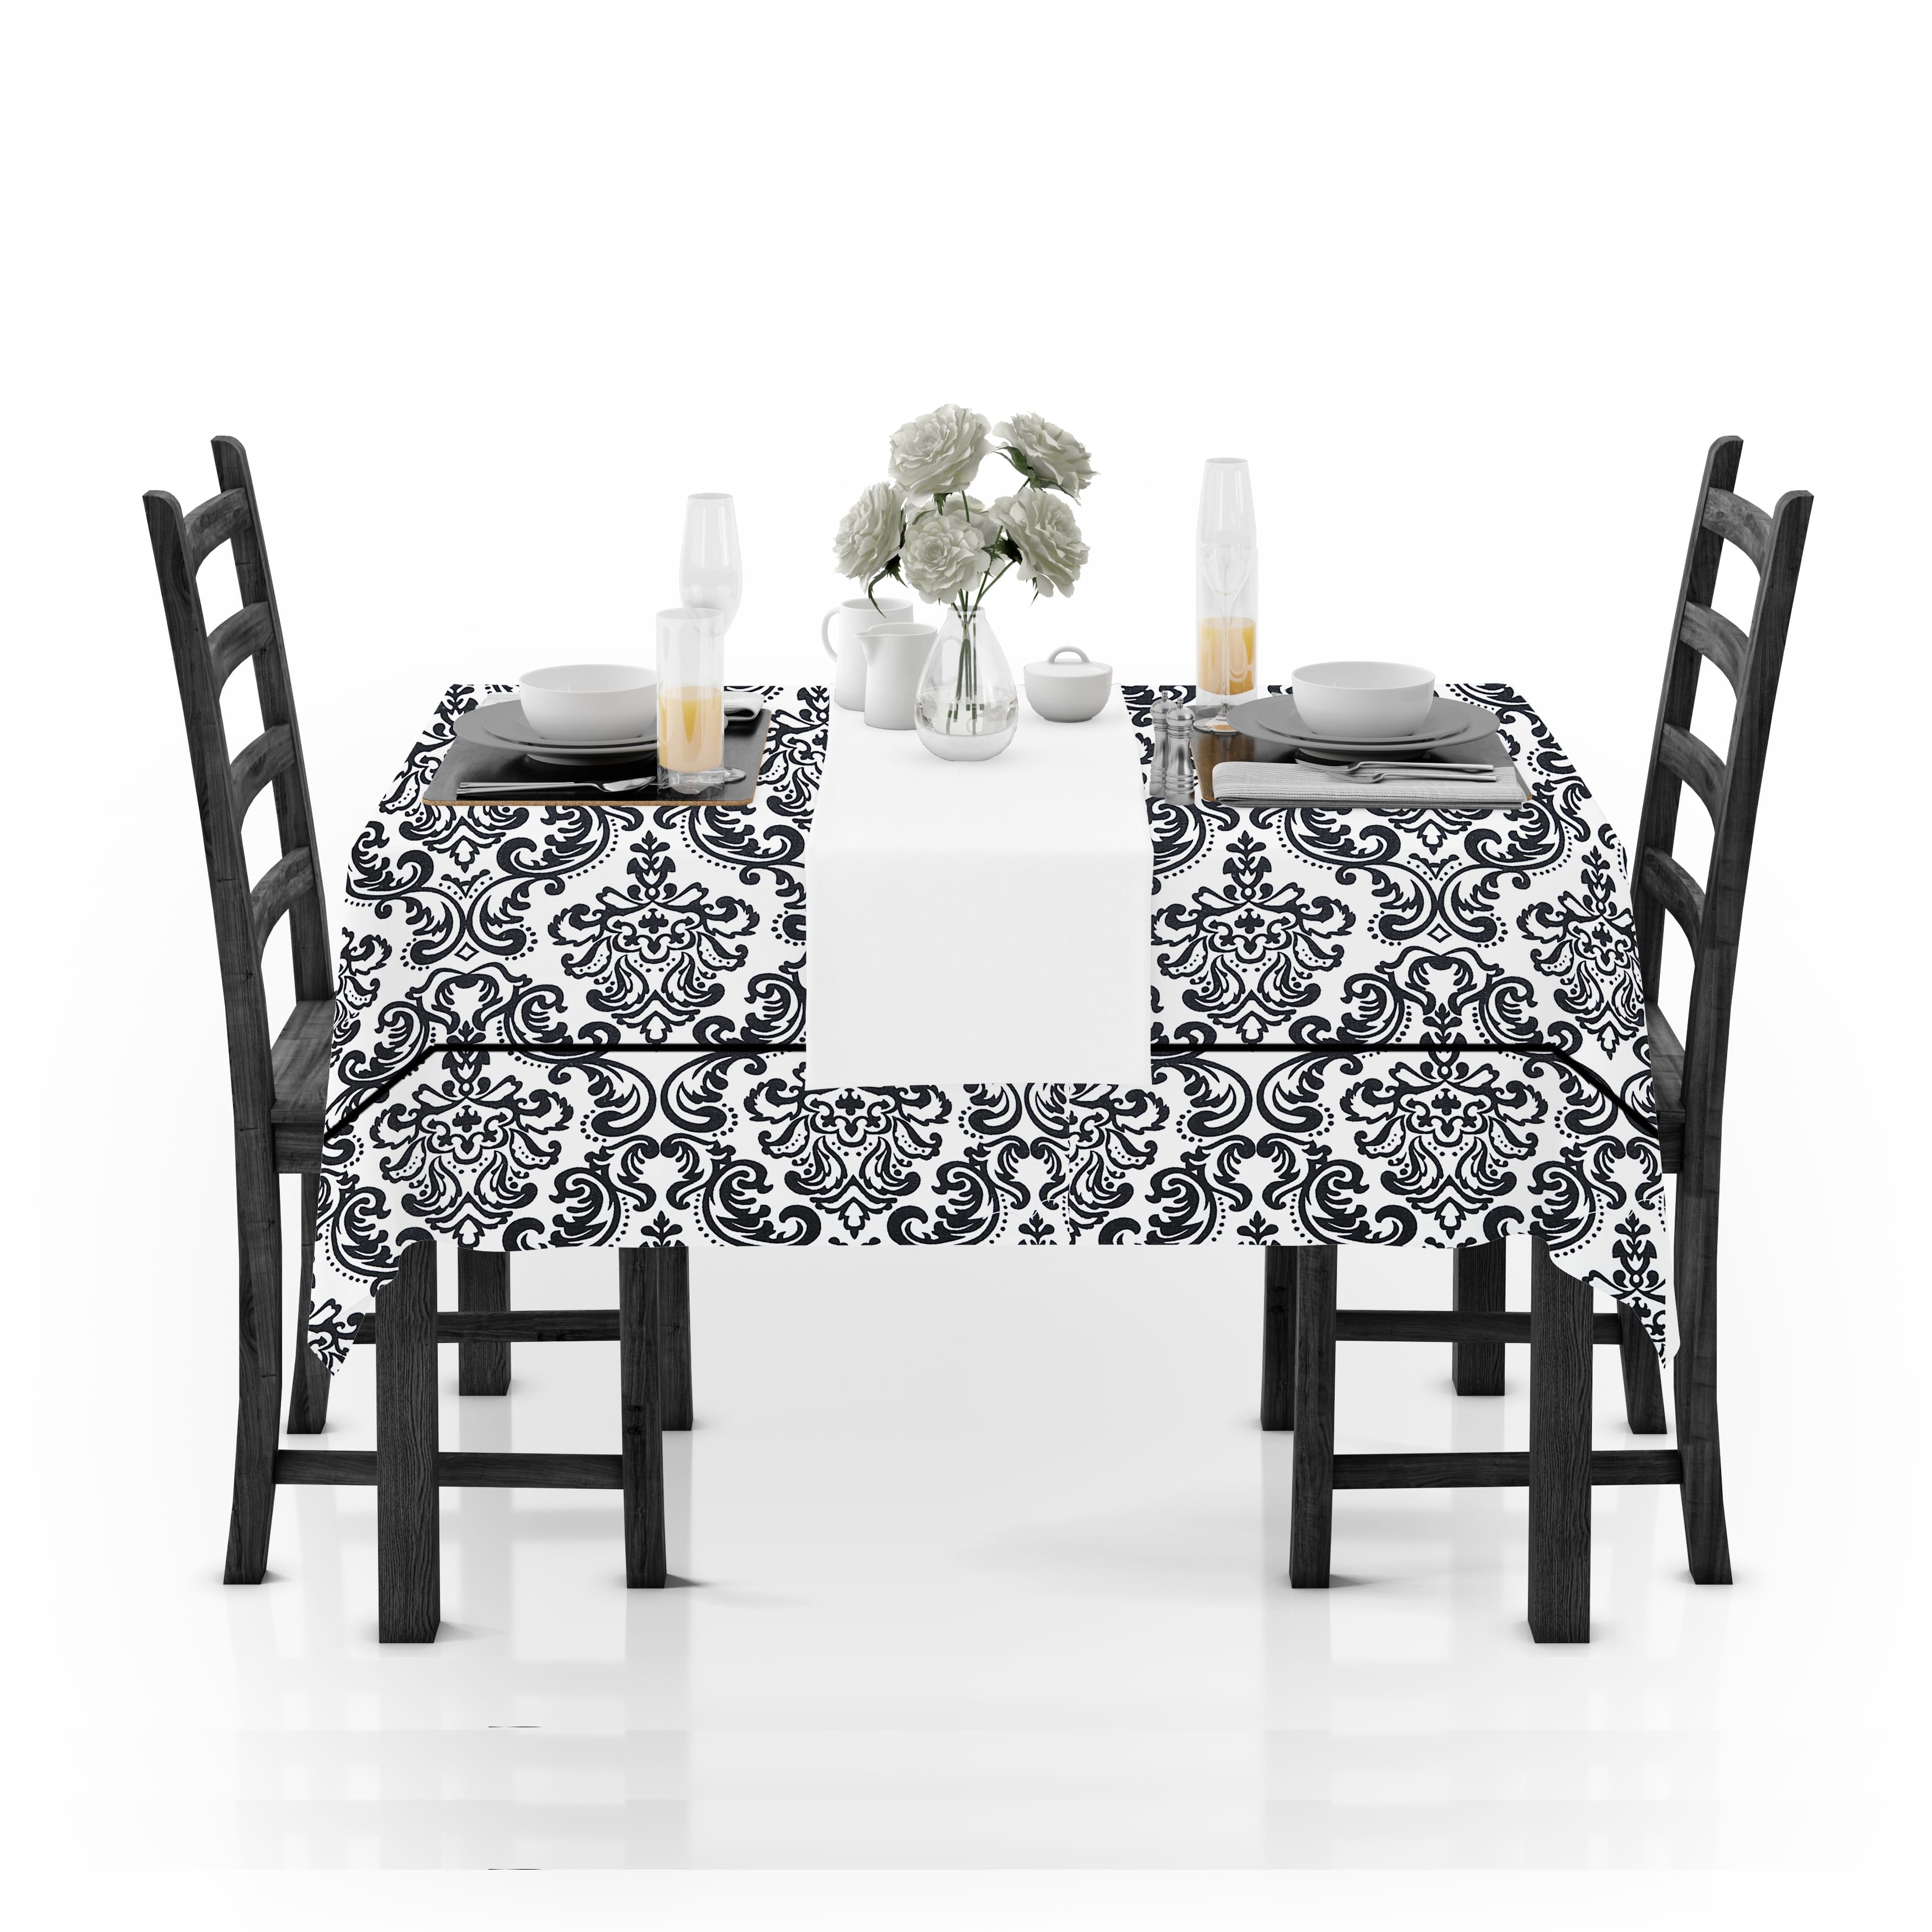 PRISM Printed Cotton Damask 1 Pc Table Cover - Black